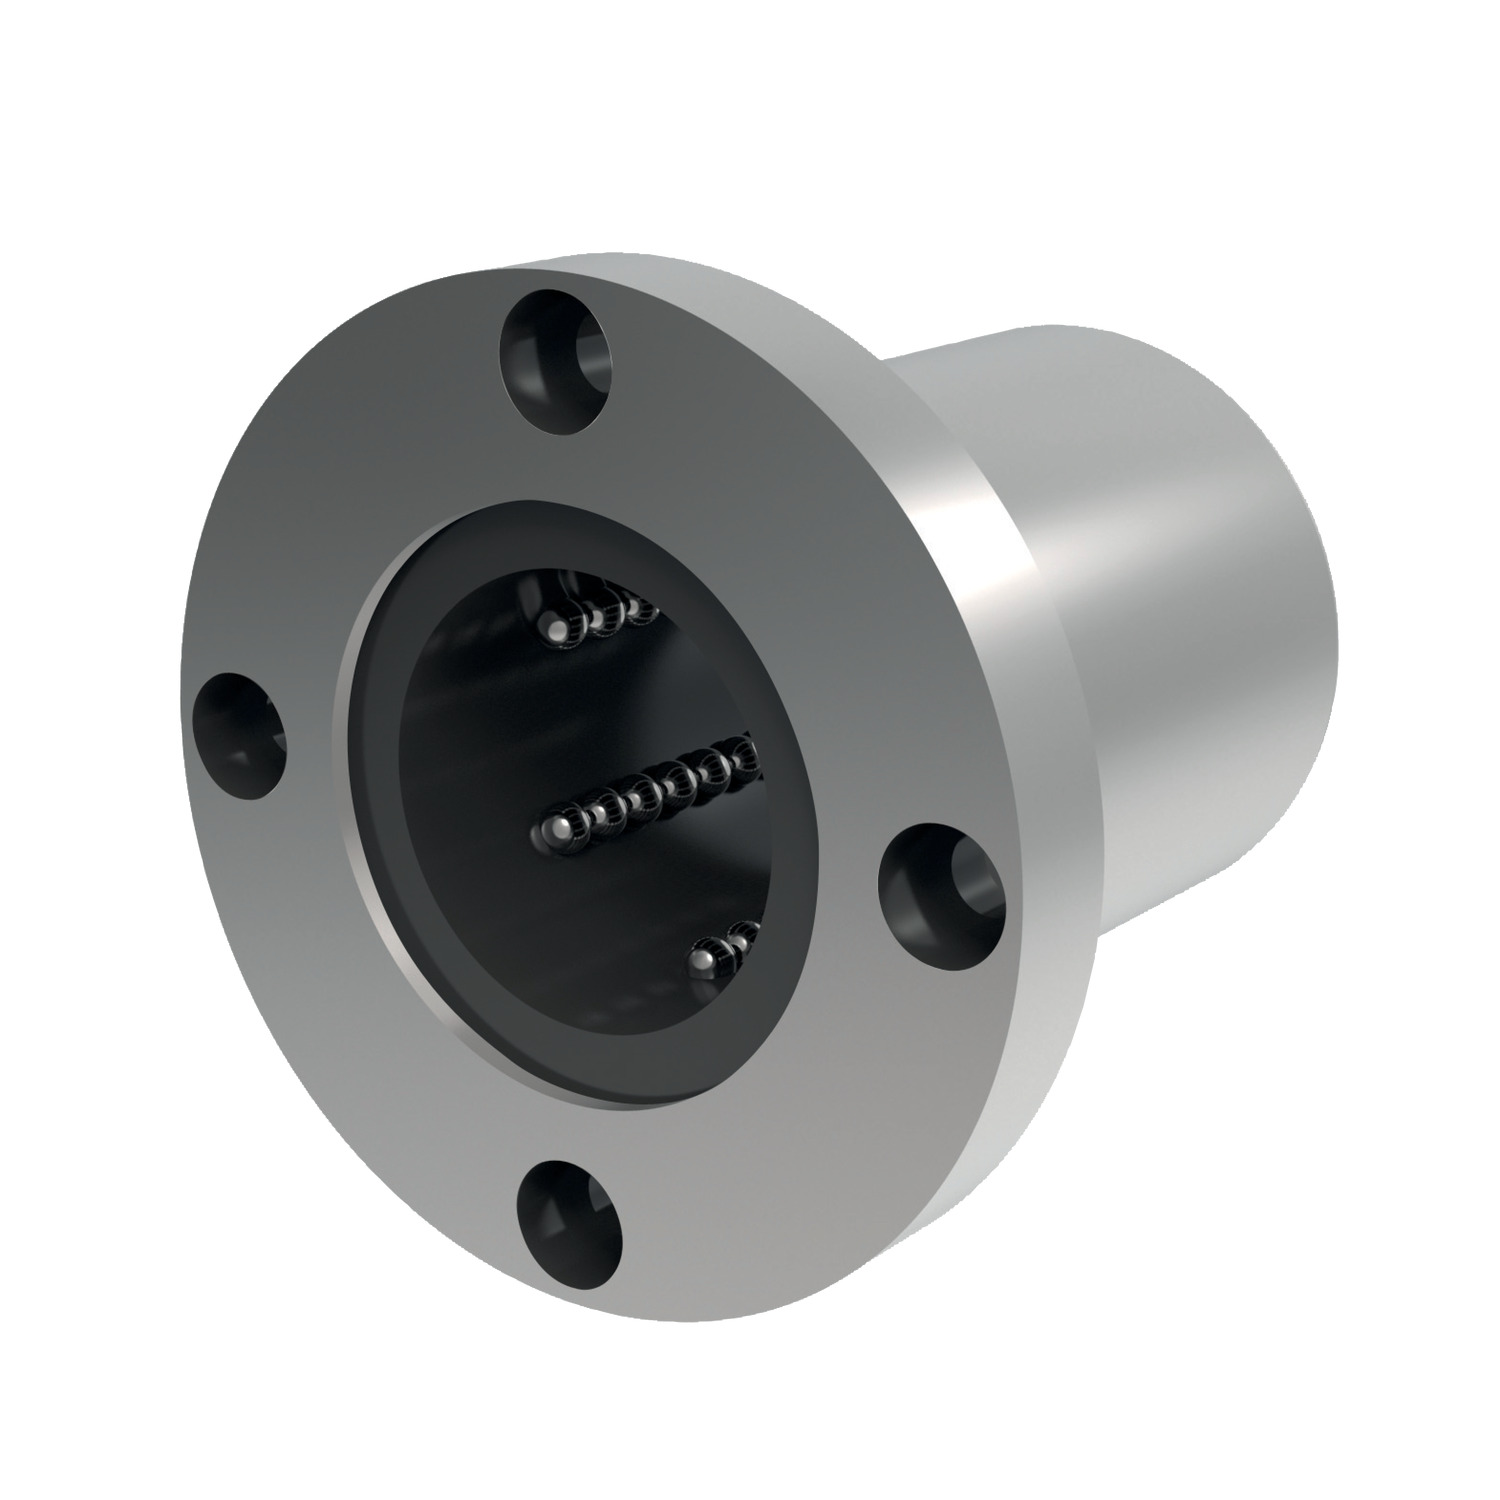 Flanged Linear Bearings Linear ball bushings with either a square of circular flange to aid installation.